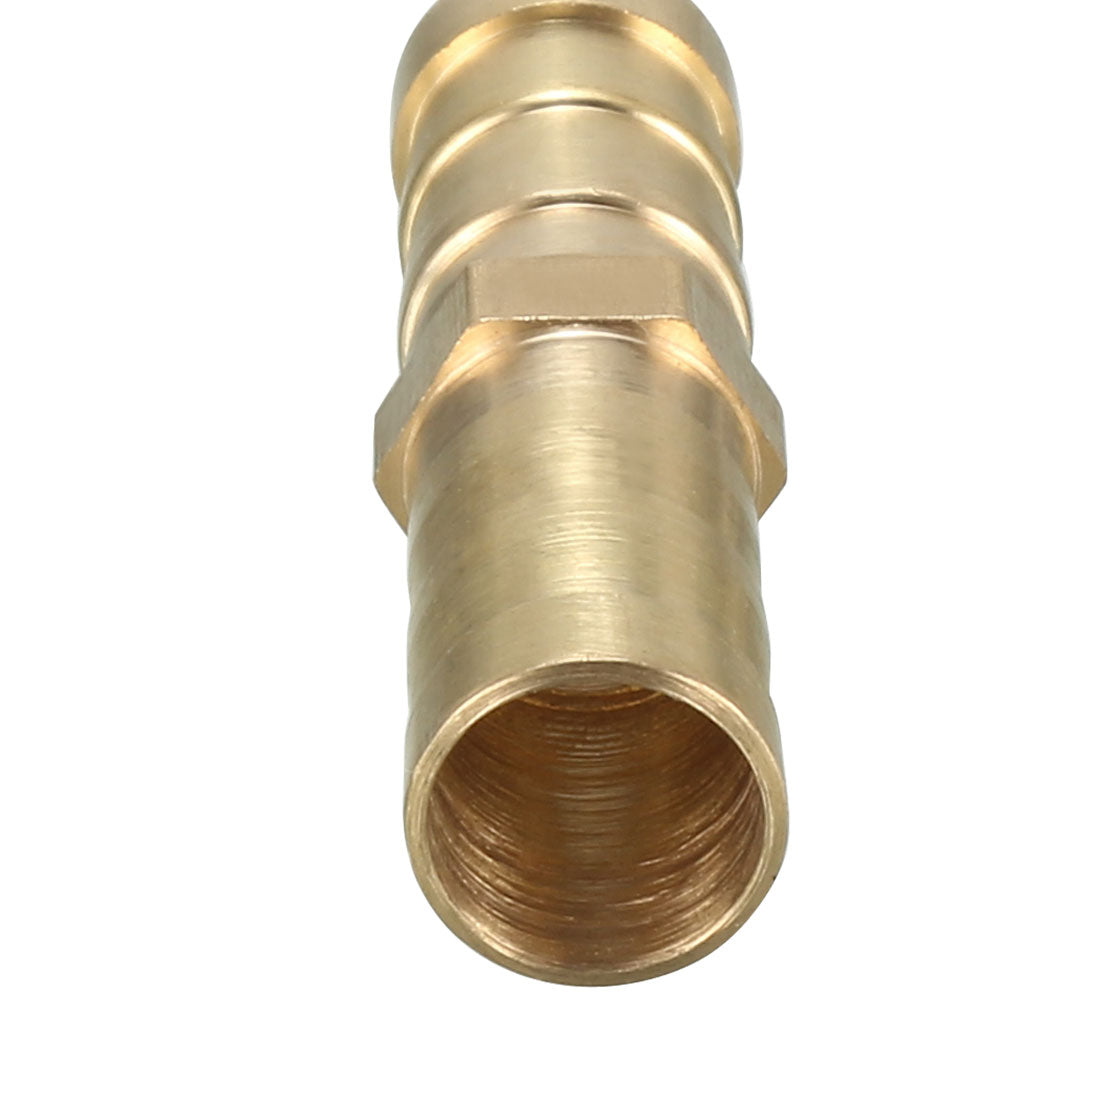 uxcell Uxcell 10mm Brass Barb Hose Fitting Straight Connector Coupler